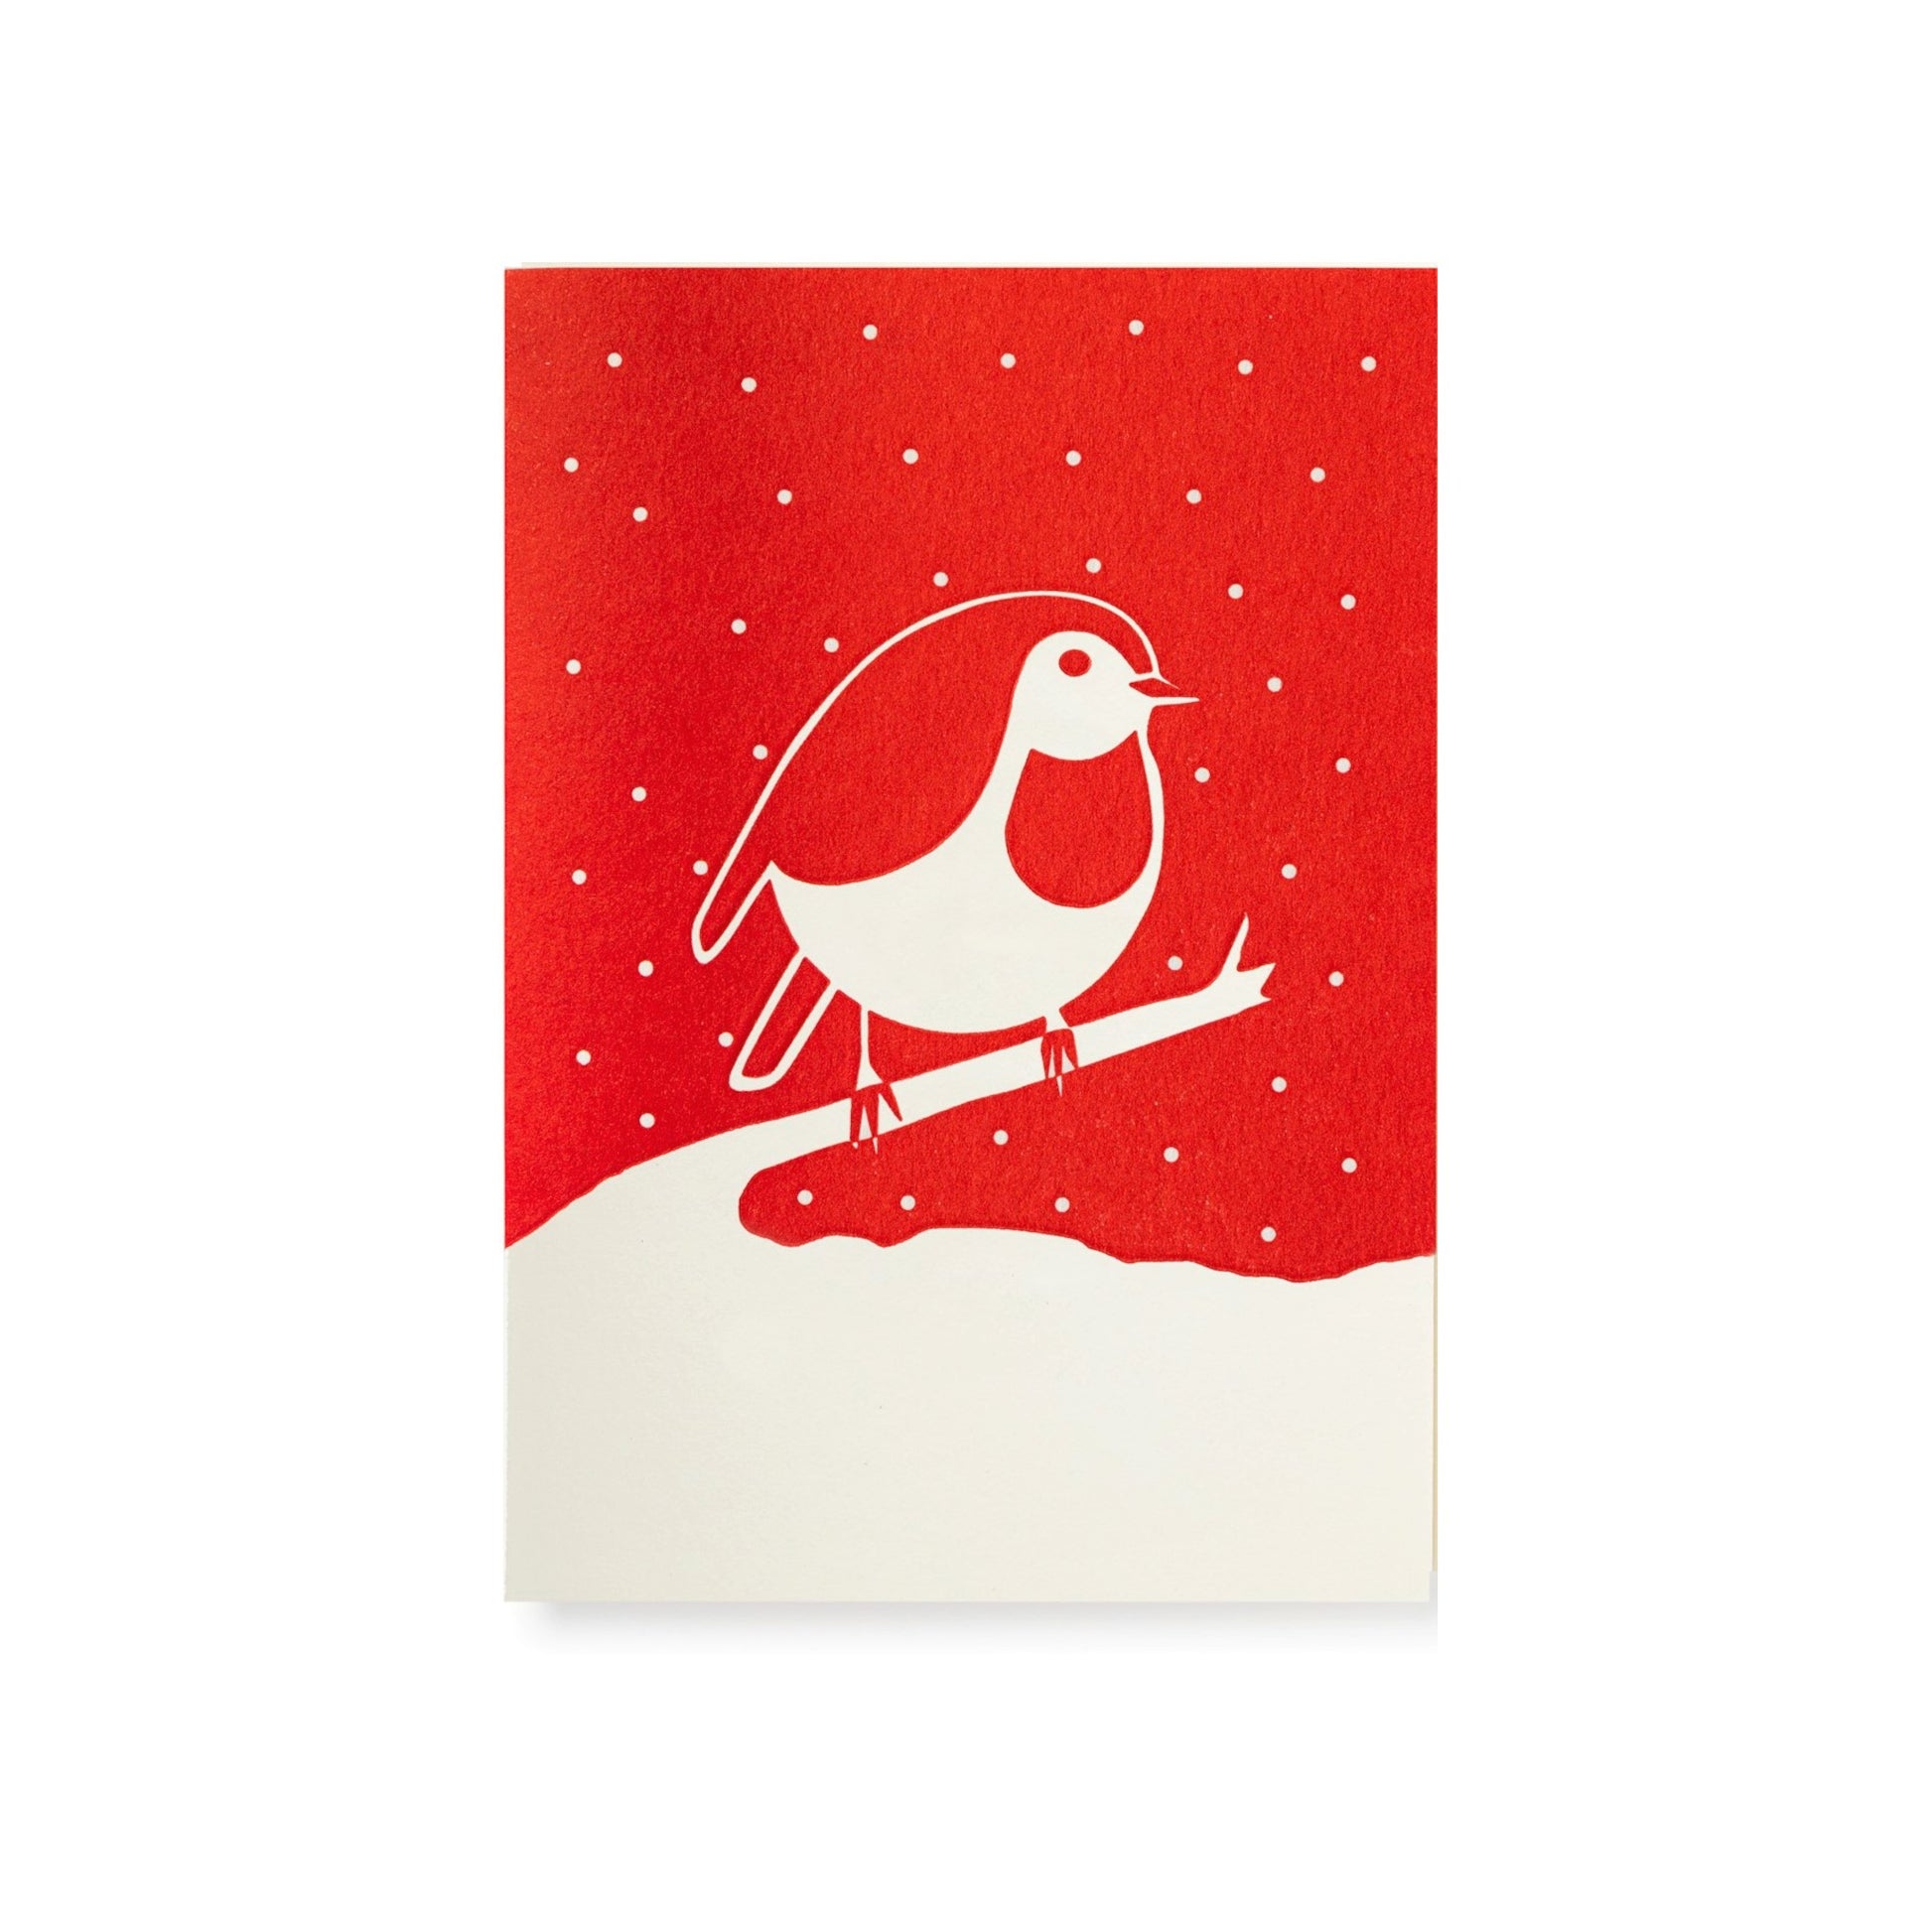 small greetings card of a red robin in the snow, by Archivist Gallery